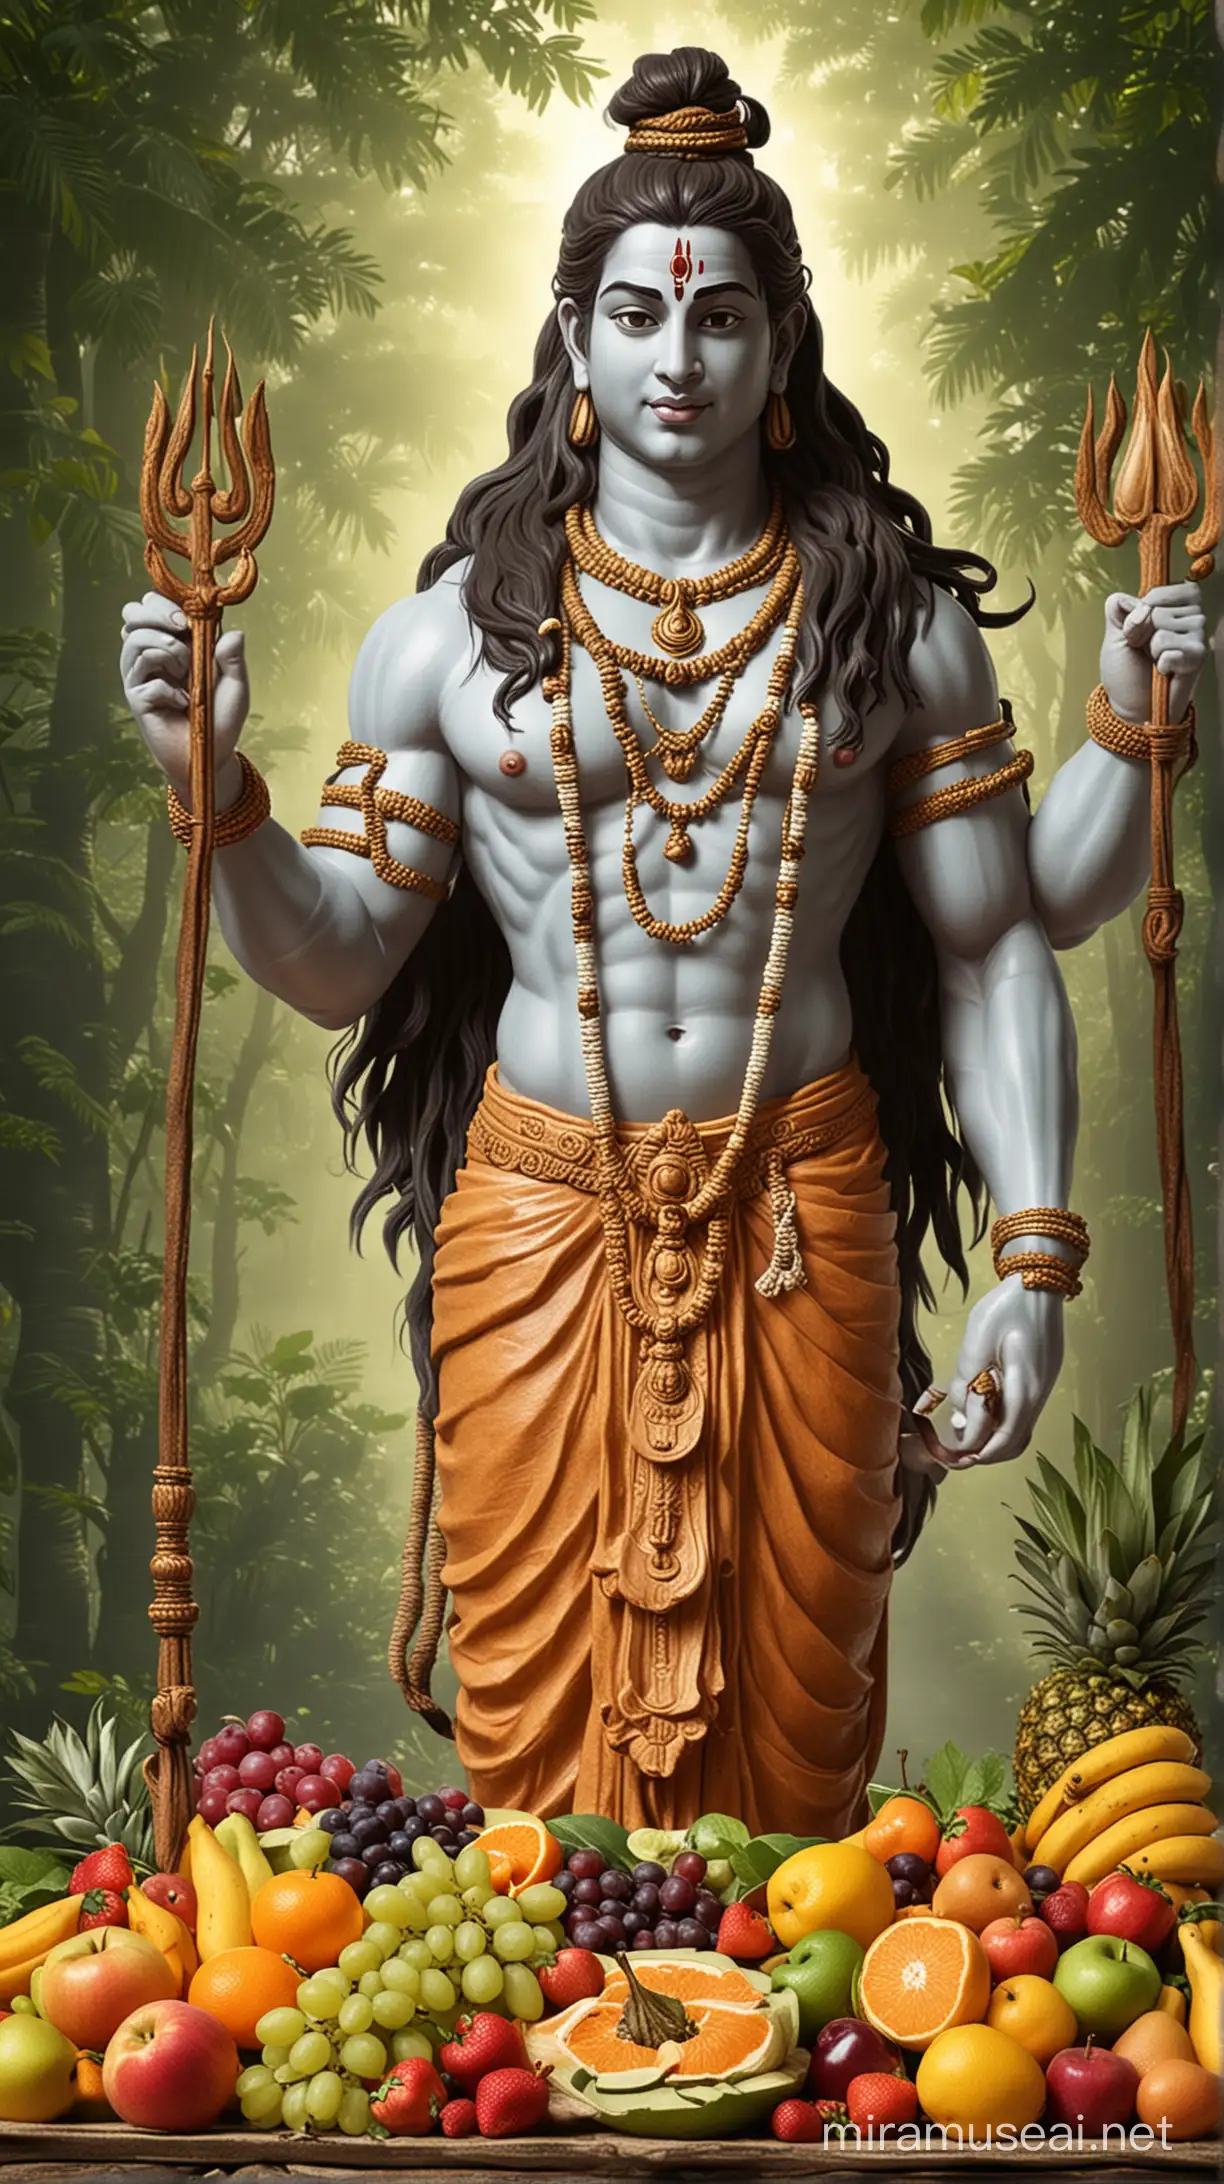 Lord Shiva Holding Divine Fruits and Foods